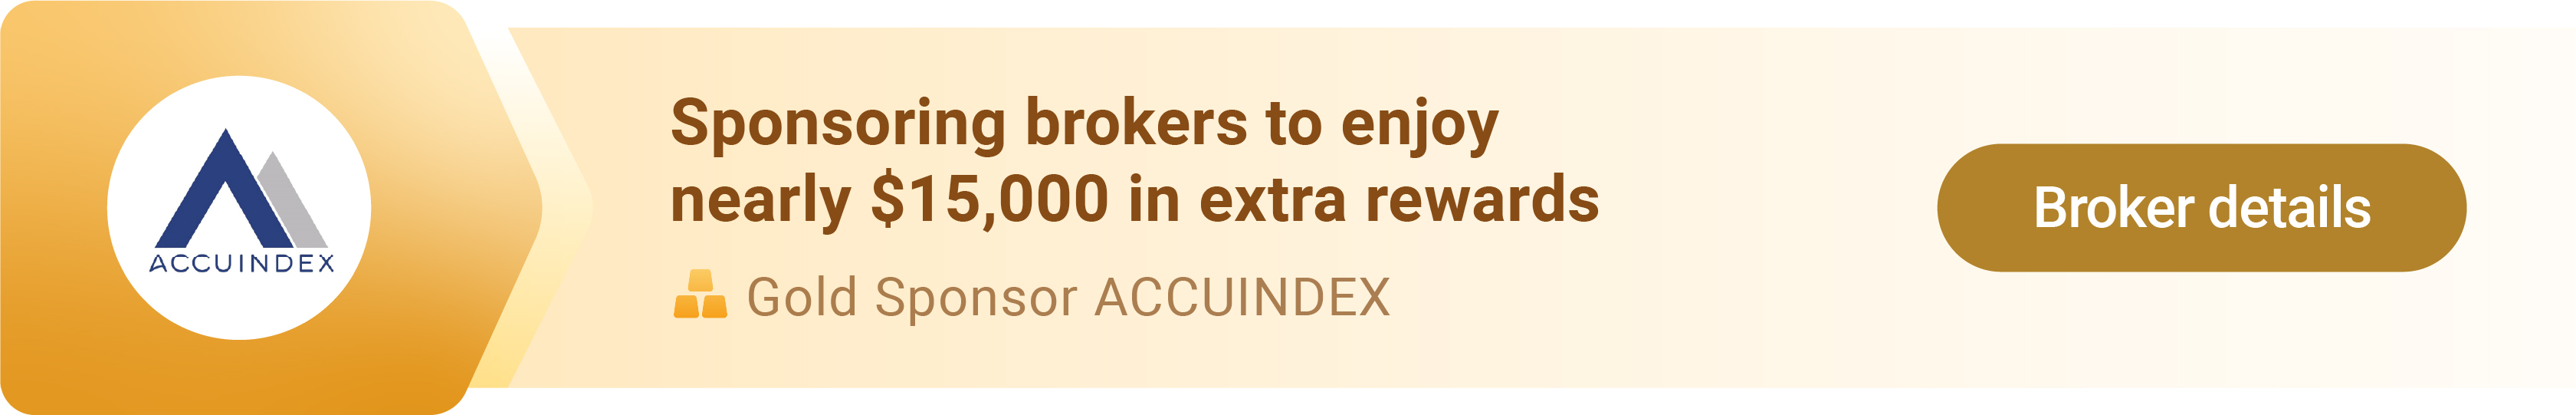 Gold Sponsor Accuindex made its debut in the Contest